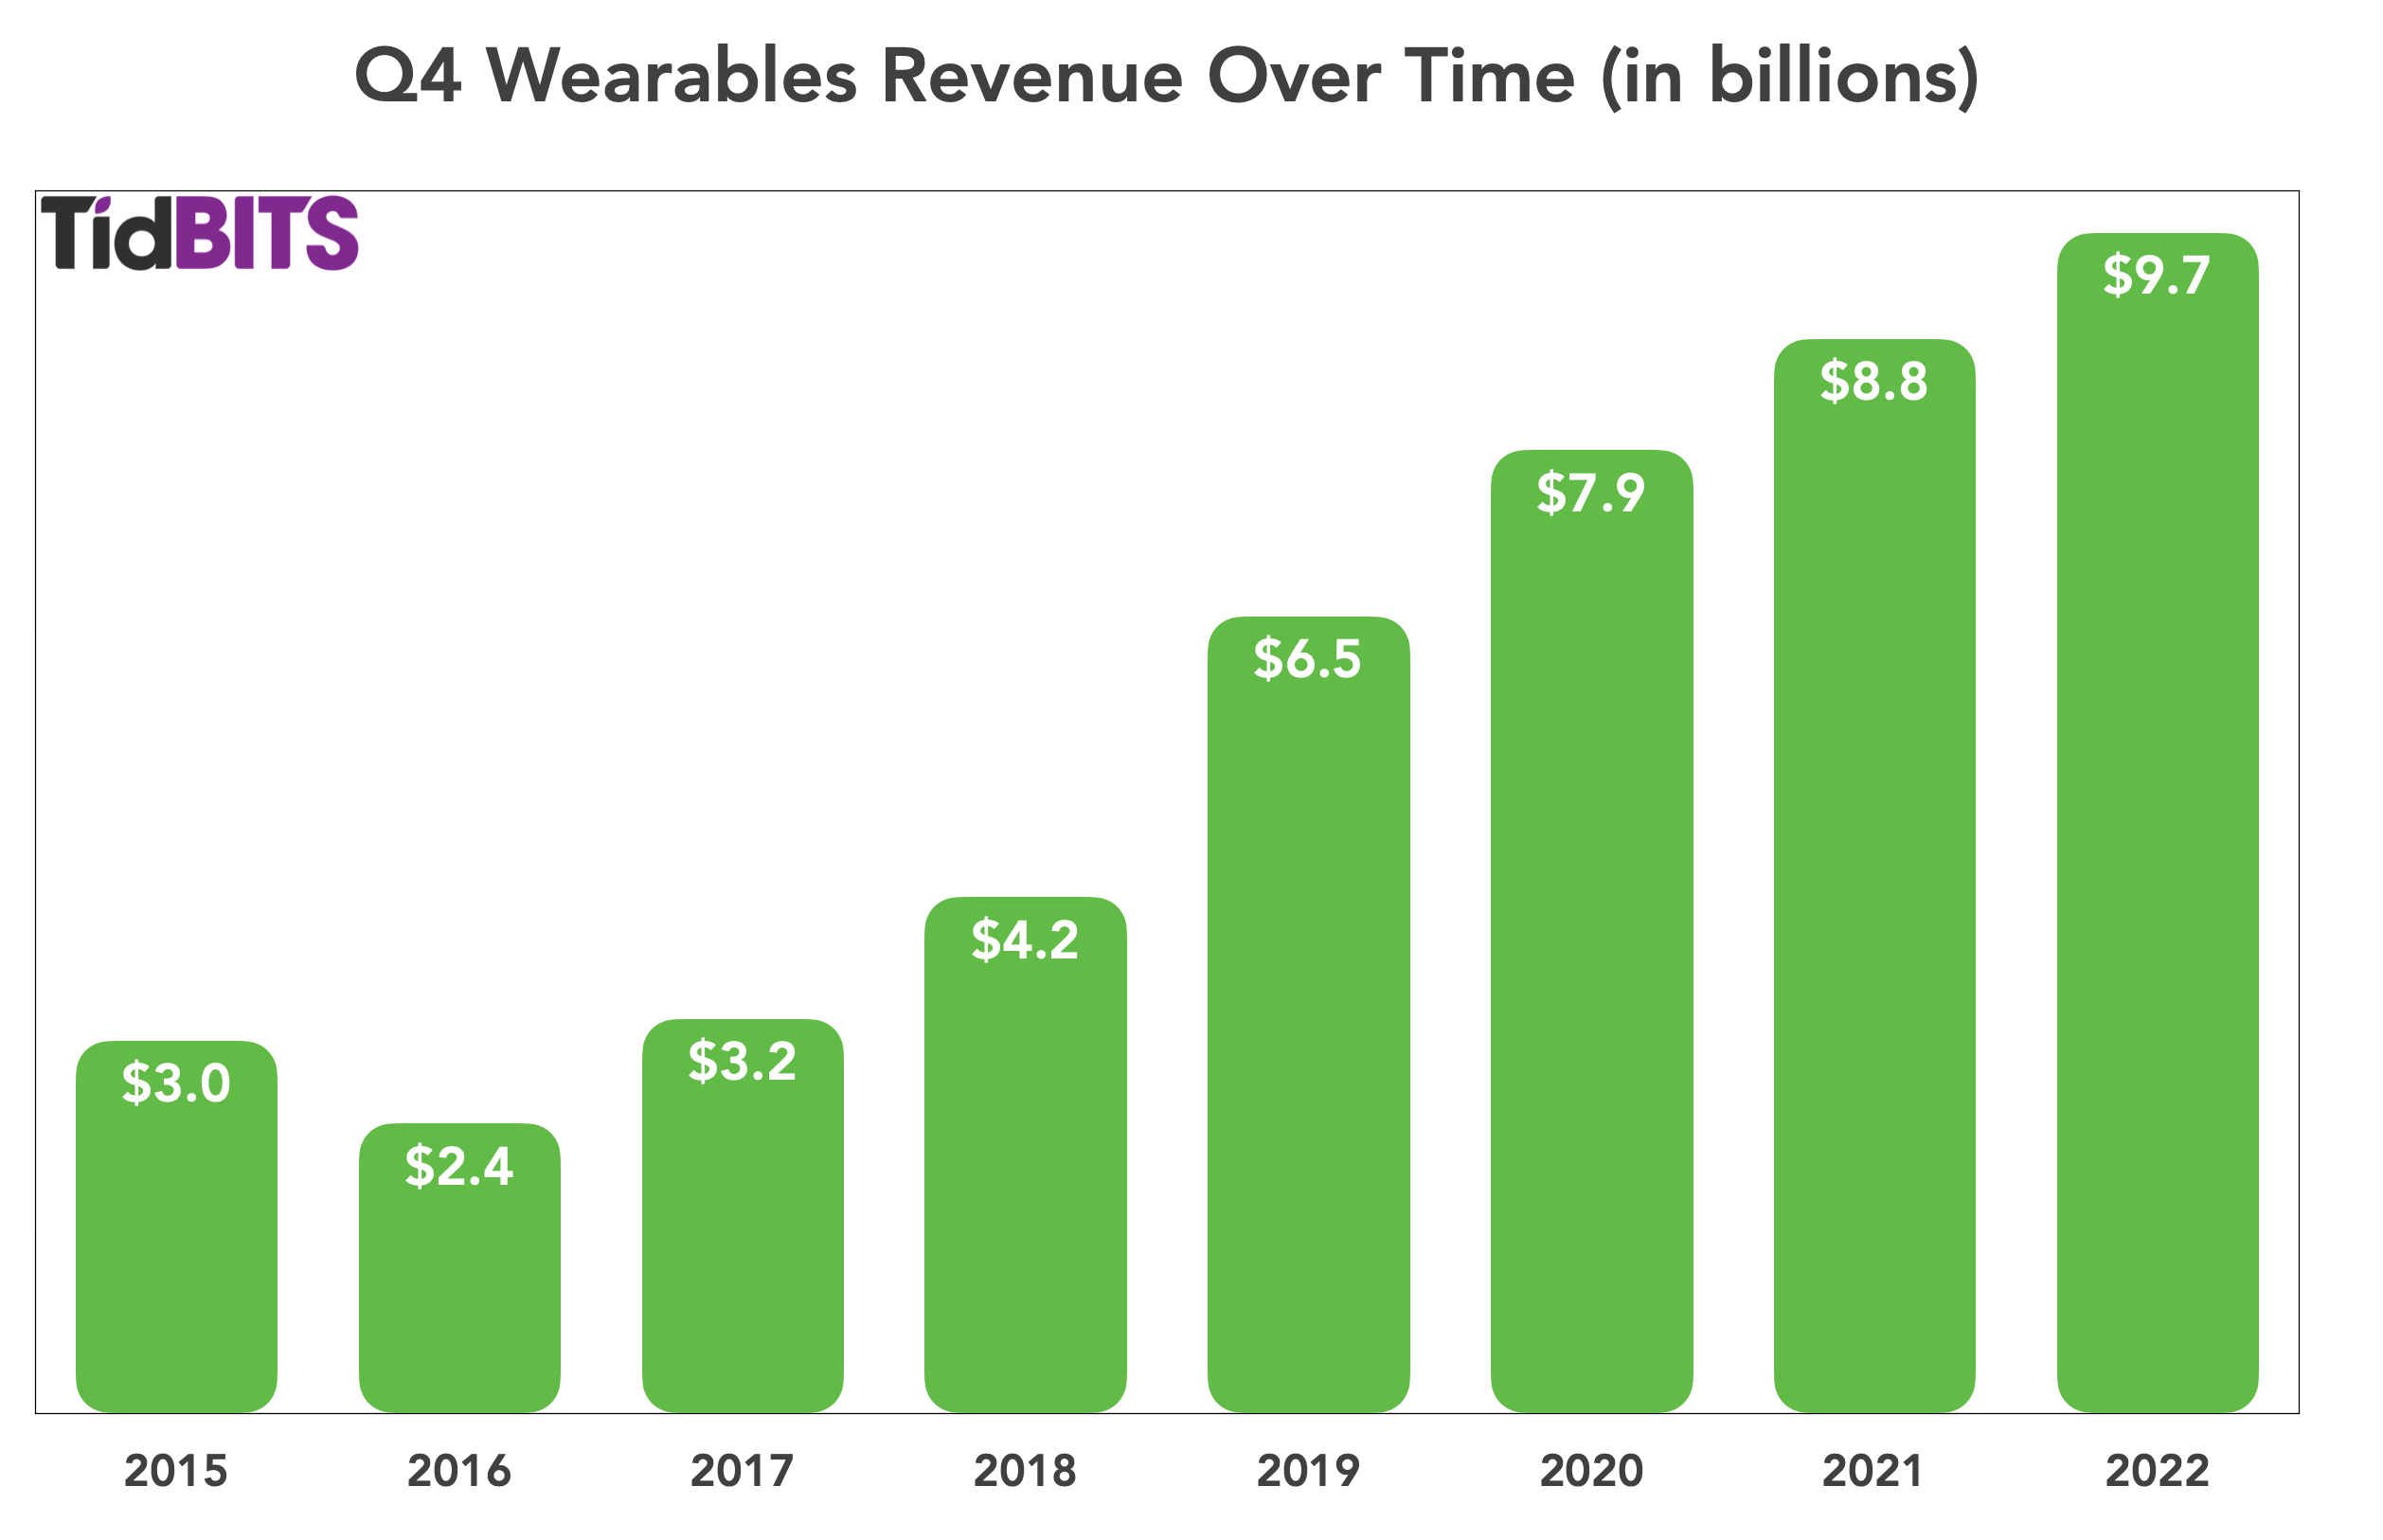 Q4 Wearables numbers